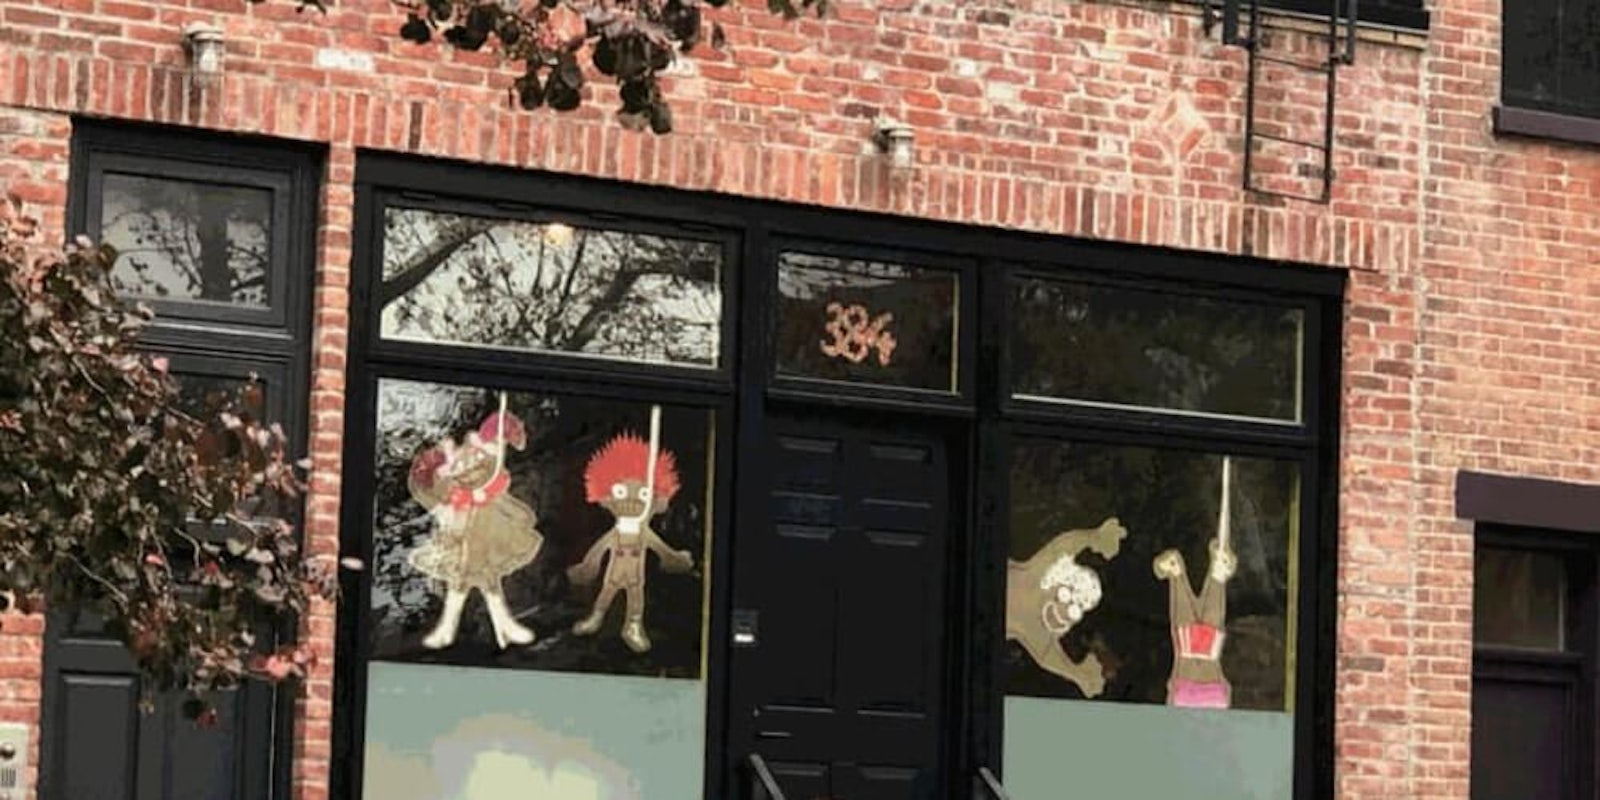 Window decorations show caricatures of children made out of brown paper seen in nooses